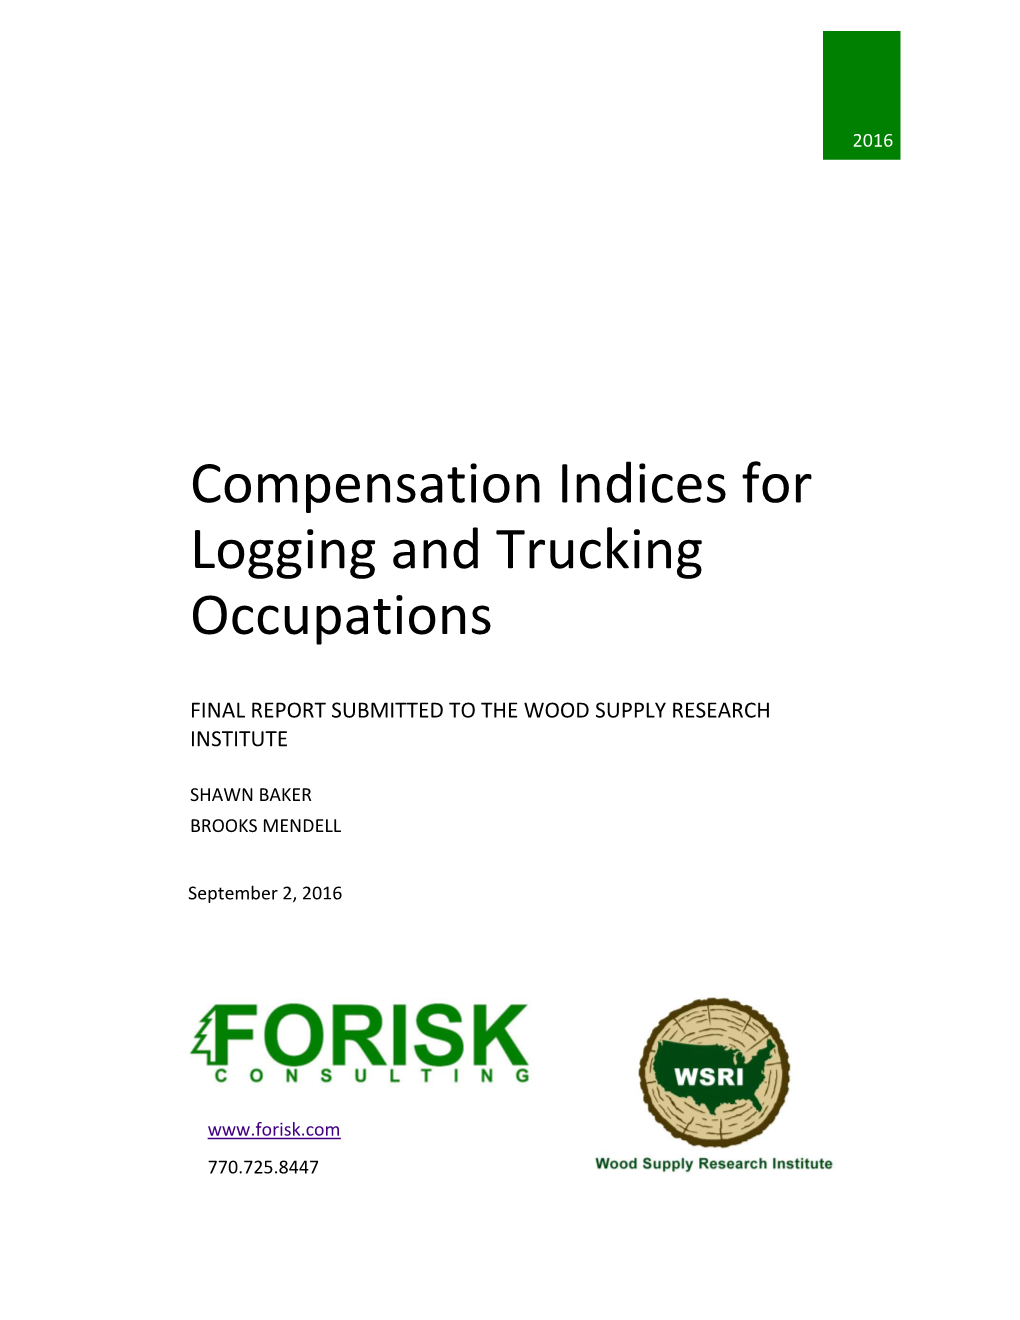 Compensation Indices for Logging and Trucking Occupations